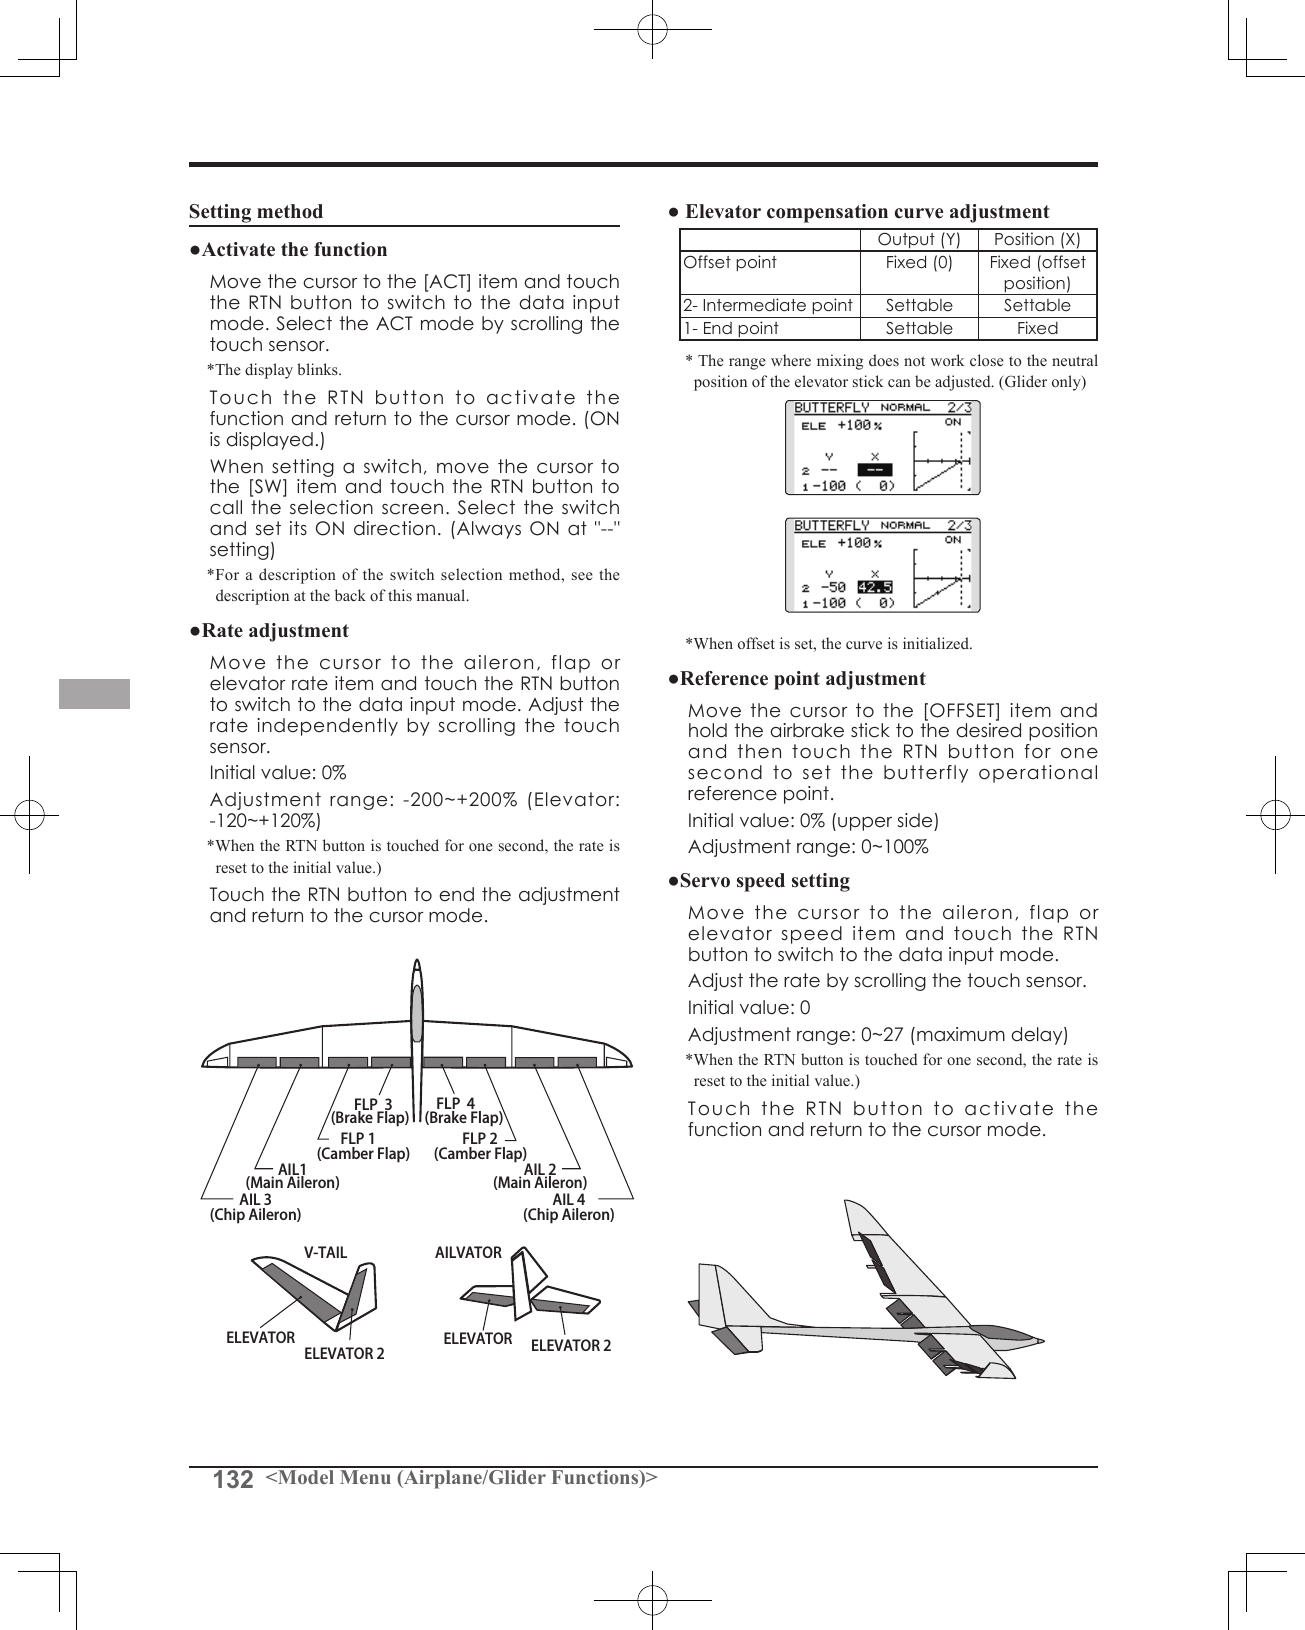 132 &lt;Model Menu (Airplane/Glider Functions)&gt;Setting method●Activate the function  Move the cursor to the [ACT] item and touch the RTN button to switch to the data input mode. Select the ACT mode by scrolling the touch sensor. *The display blinks.  Touch the RTN button to activate the function and return to the cursor mode. (ON is displayed.)  When setting a switch, move the cursor to the [SW] item and touch the RTN  button to call the selection screen. Select the switch and set its  ON  direction. (Always ON  at  &quot;--&quot; setting)*For a description of the switch selection method, see the description at the back of this manual.●Rate adjustment  Move the cursor to the aileron, flap or elevator rate item and touch the RTN button to switch to the data input mode. Adjust the rate independently by scrolling the touch sensor.   Initial value: 0%  Adjustment  range:  -200~+200%  (Elevator:  -120~+120%)*When the RTN button is touched for one second, the rate is reset to the initial value.)  Touch the RTN button to end the adjustment and return to the cursor mode.● Elevator compensation curve adjustmentOutput (Y) Position (X)Offset point Fixed (0) Fixed (offset position)2- Intermediate point Settable Settable1- End point Settable Fixed* The range where mixing does not work close to the neutral position of the elevator stick can be adjusted. (Glider only)*When offset is set, the curve is initialized.●Reference point adjustment  Move  the  cursor  to  the  [OFFSET]  item  and hold the airbrake stick to the desired position and then touch the RTN button for one second to set the butterfly operational reference point.   Initial value: 0% (upper side)  Adjustment range: 0~100% ●Servo speed setting  Move the cursor to the aileron, flap or elevator speed item and touch the RTN button to switch to the data input mode.   Adjust the rate by scrolling the touch sensor.   Initial value: 0  Adjustment range: 0~27 (maximum delay)*When the RTN button is touched for one second, the rate is reset to the initial value.)  Touch the RTN button to activate the function and return to the cursor mode.AIL 3(Chip Aileron) AIL 4(Chip Aileron)AIL1(Main Aileron) AIL 2(Main Aileron)FLP 2(Camber Flap)FLP 1(Camber Flap)ELEVATOR ELEVATOR 2V-TAILELEVATOR ELEVATOR 2AILVATORFLP  3(Brake Flap) FLP  4(Brake Flap)